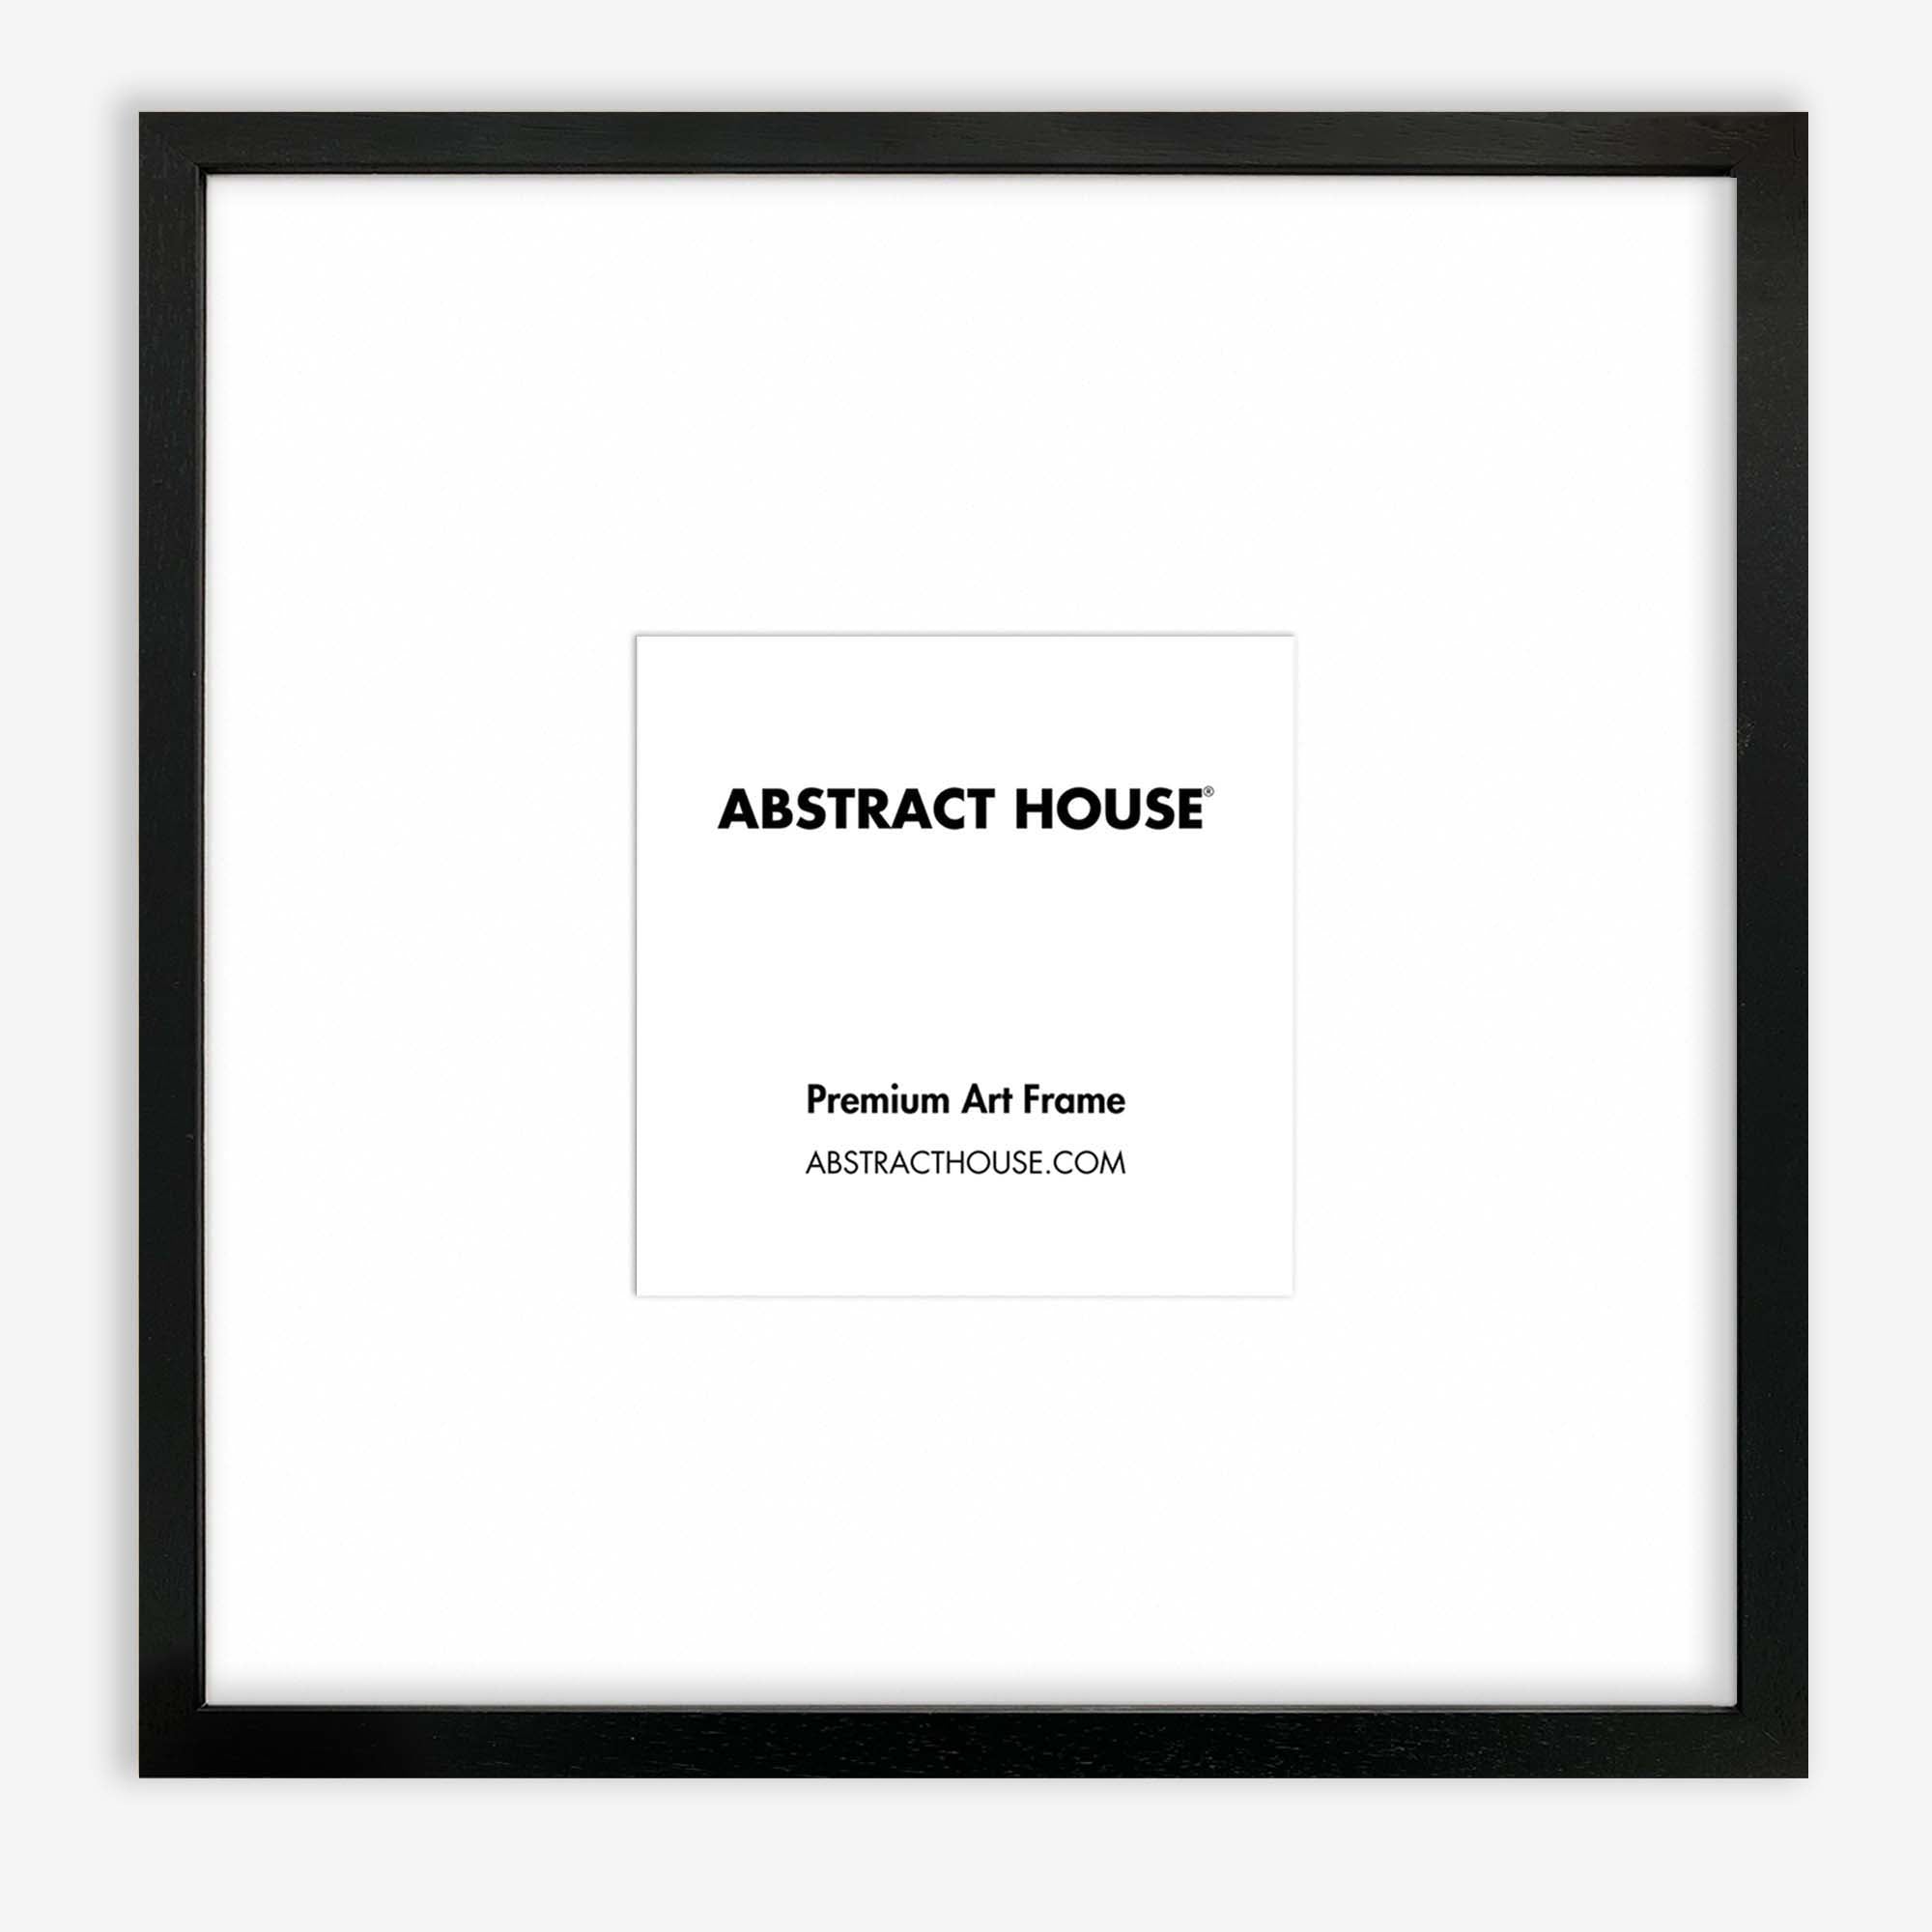 50x50 cm Wooden Frame-Black-20 x 20 cm / 7.9 x 7.9 Inches-Abstract House